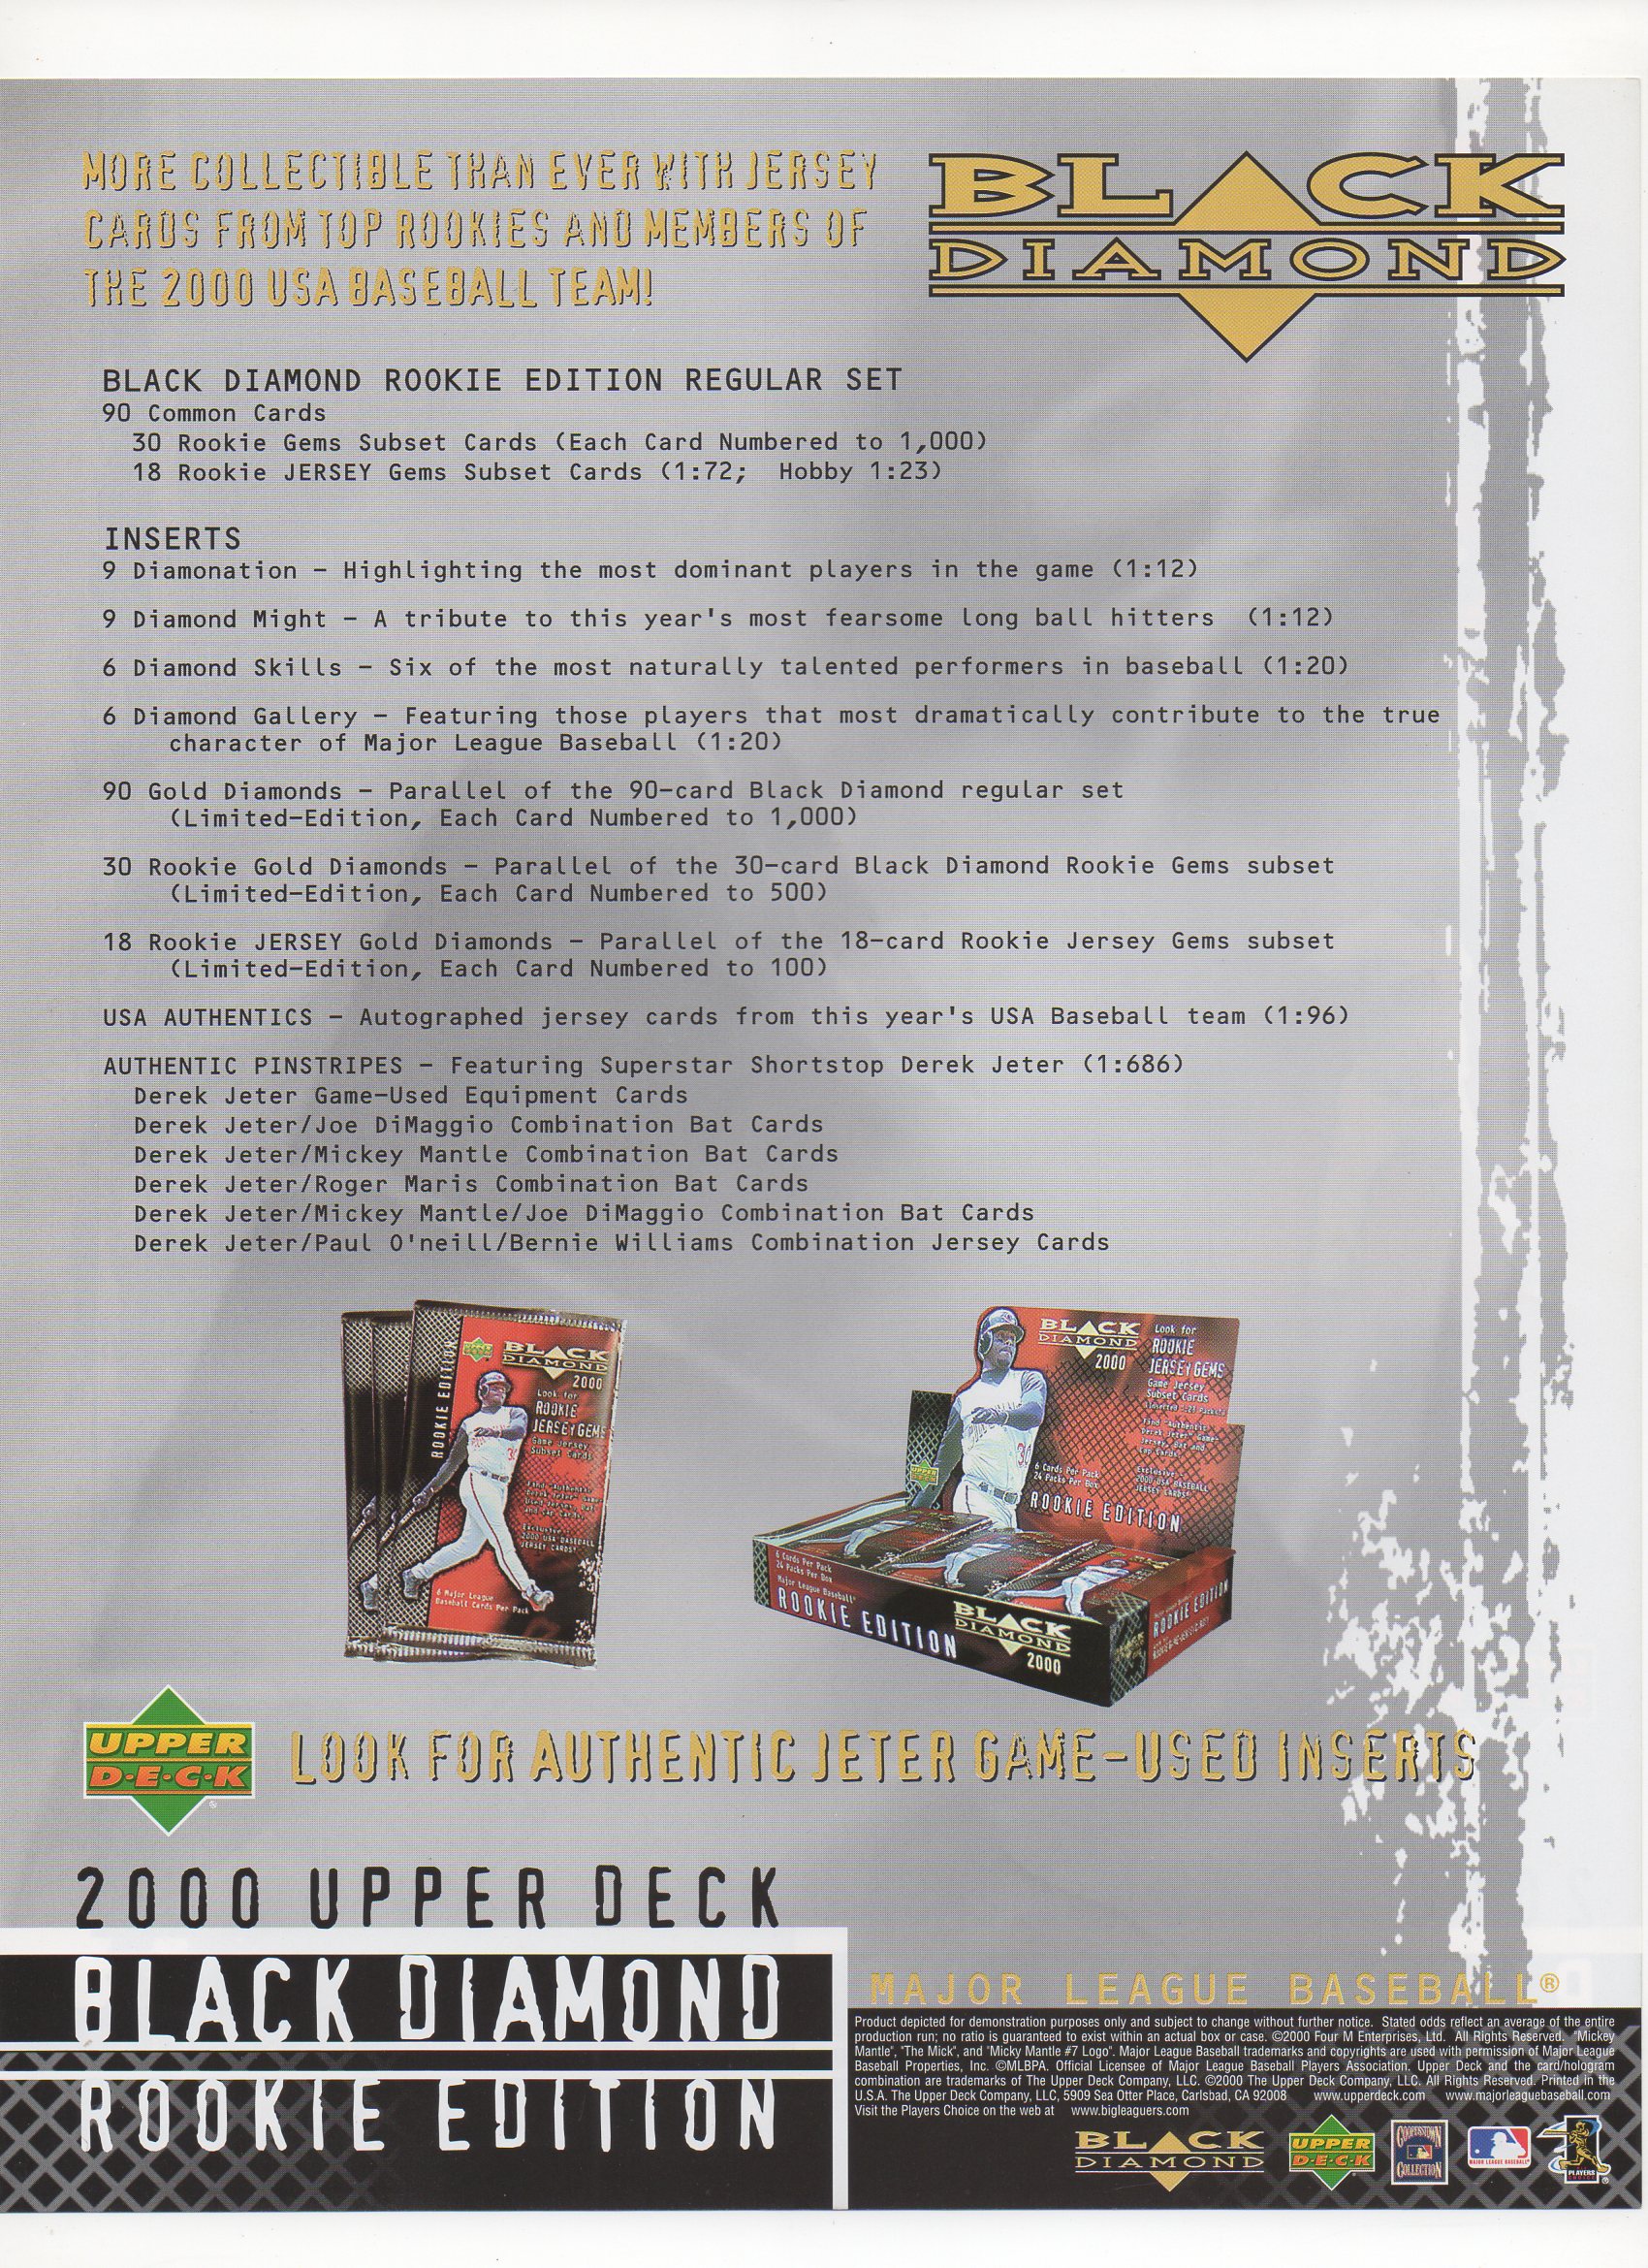 2000 upper deck flyer two sided